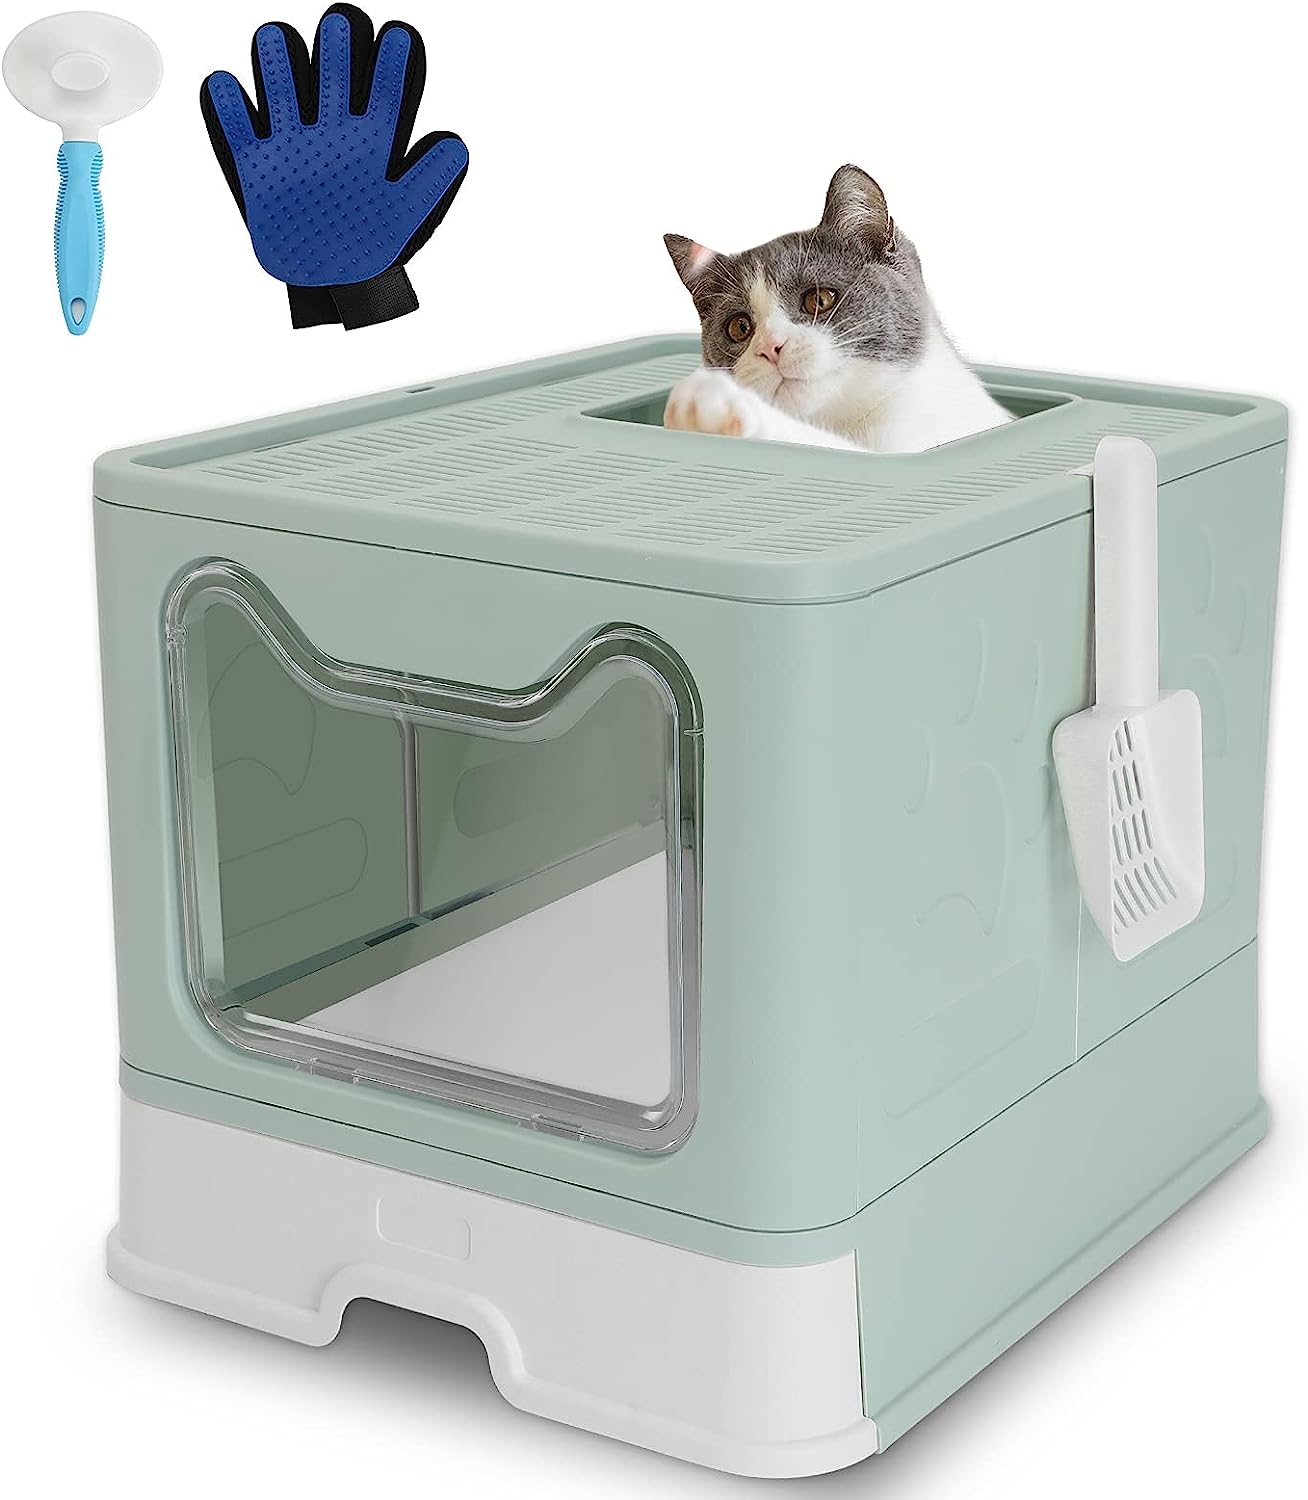 ROCCS Foldable Cat Litter Box with Lid,No Smell Large [...]